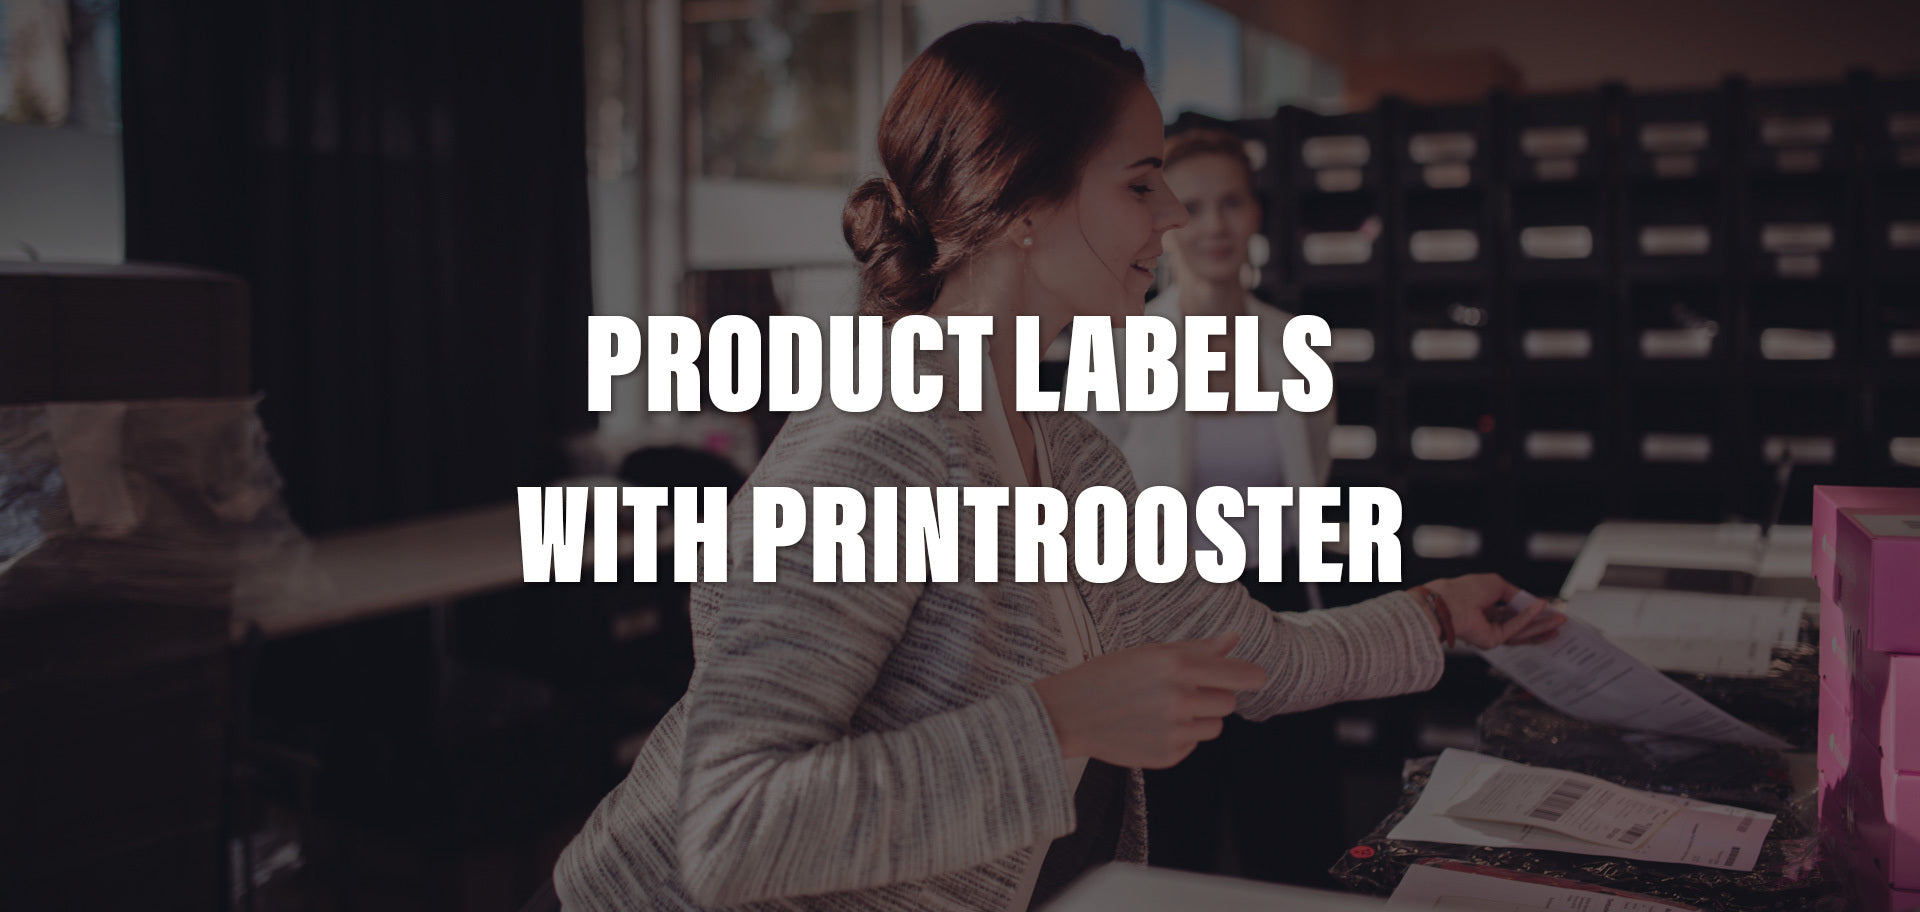 Printing product labels with Printrooster